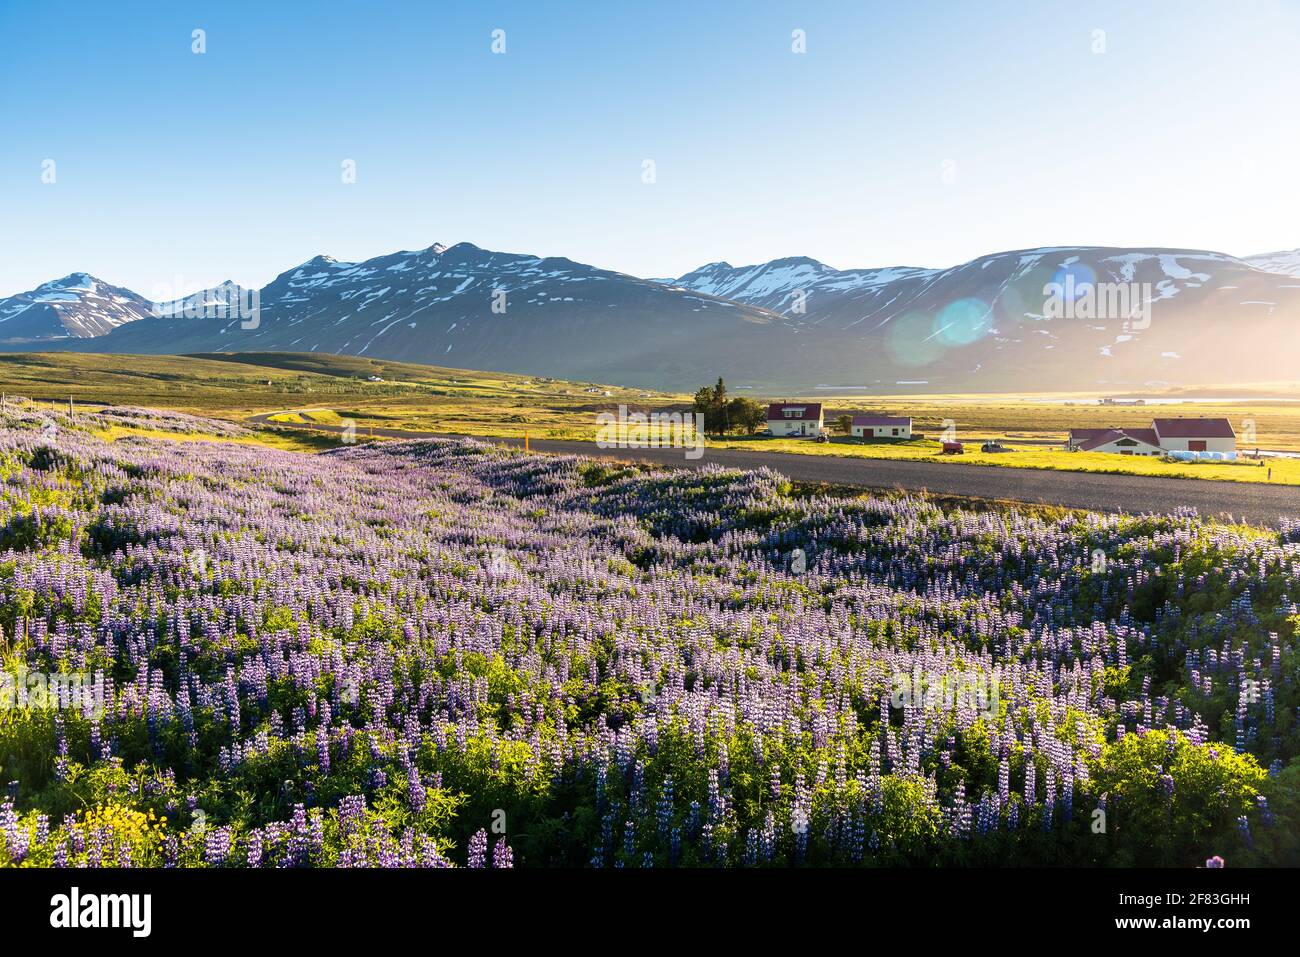 Winding road running through a rural landscape with mountains in background and a flowery meadows in foreground under midnight sun. Lens flare. Stock Photo